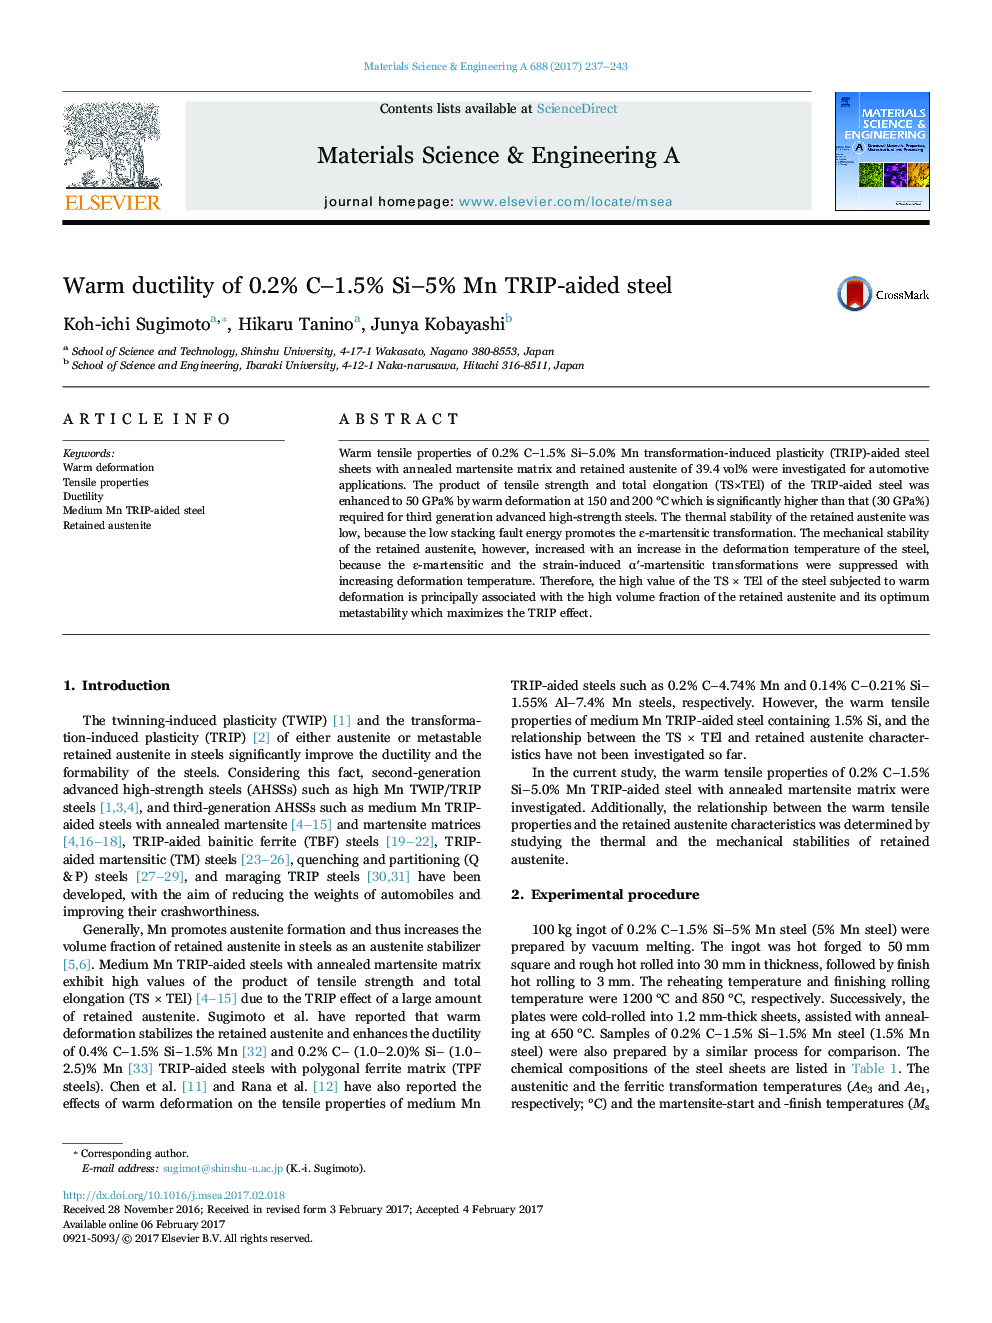 Warm ductility of 0.2% C-1.5% Si-5% Mn TRIP-aided steel